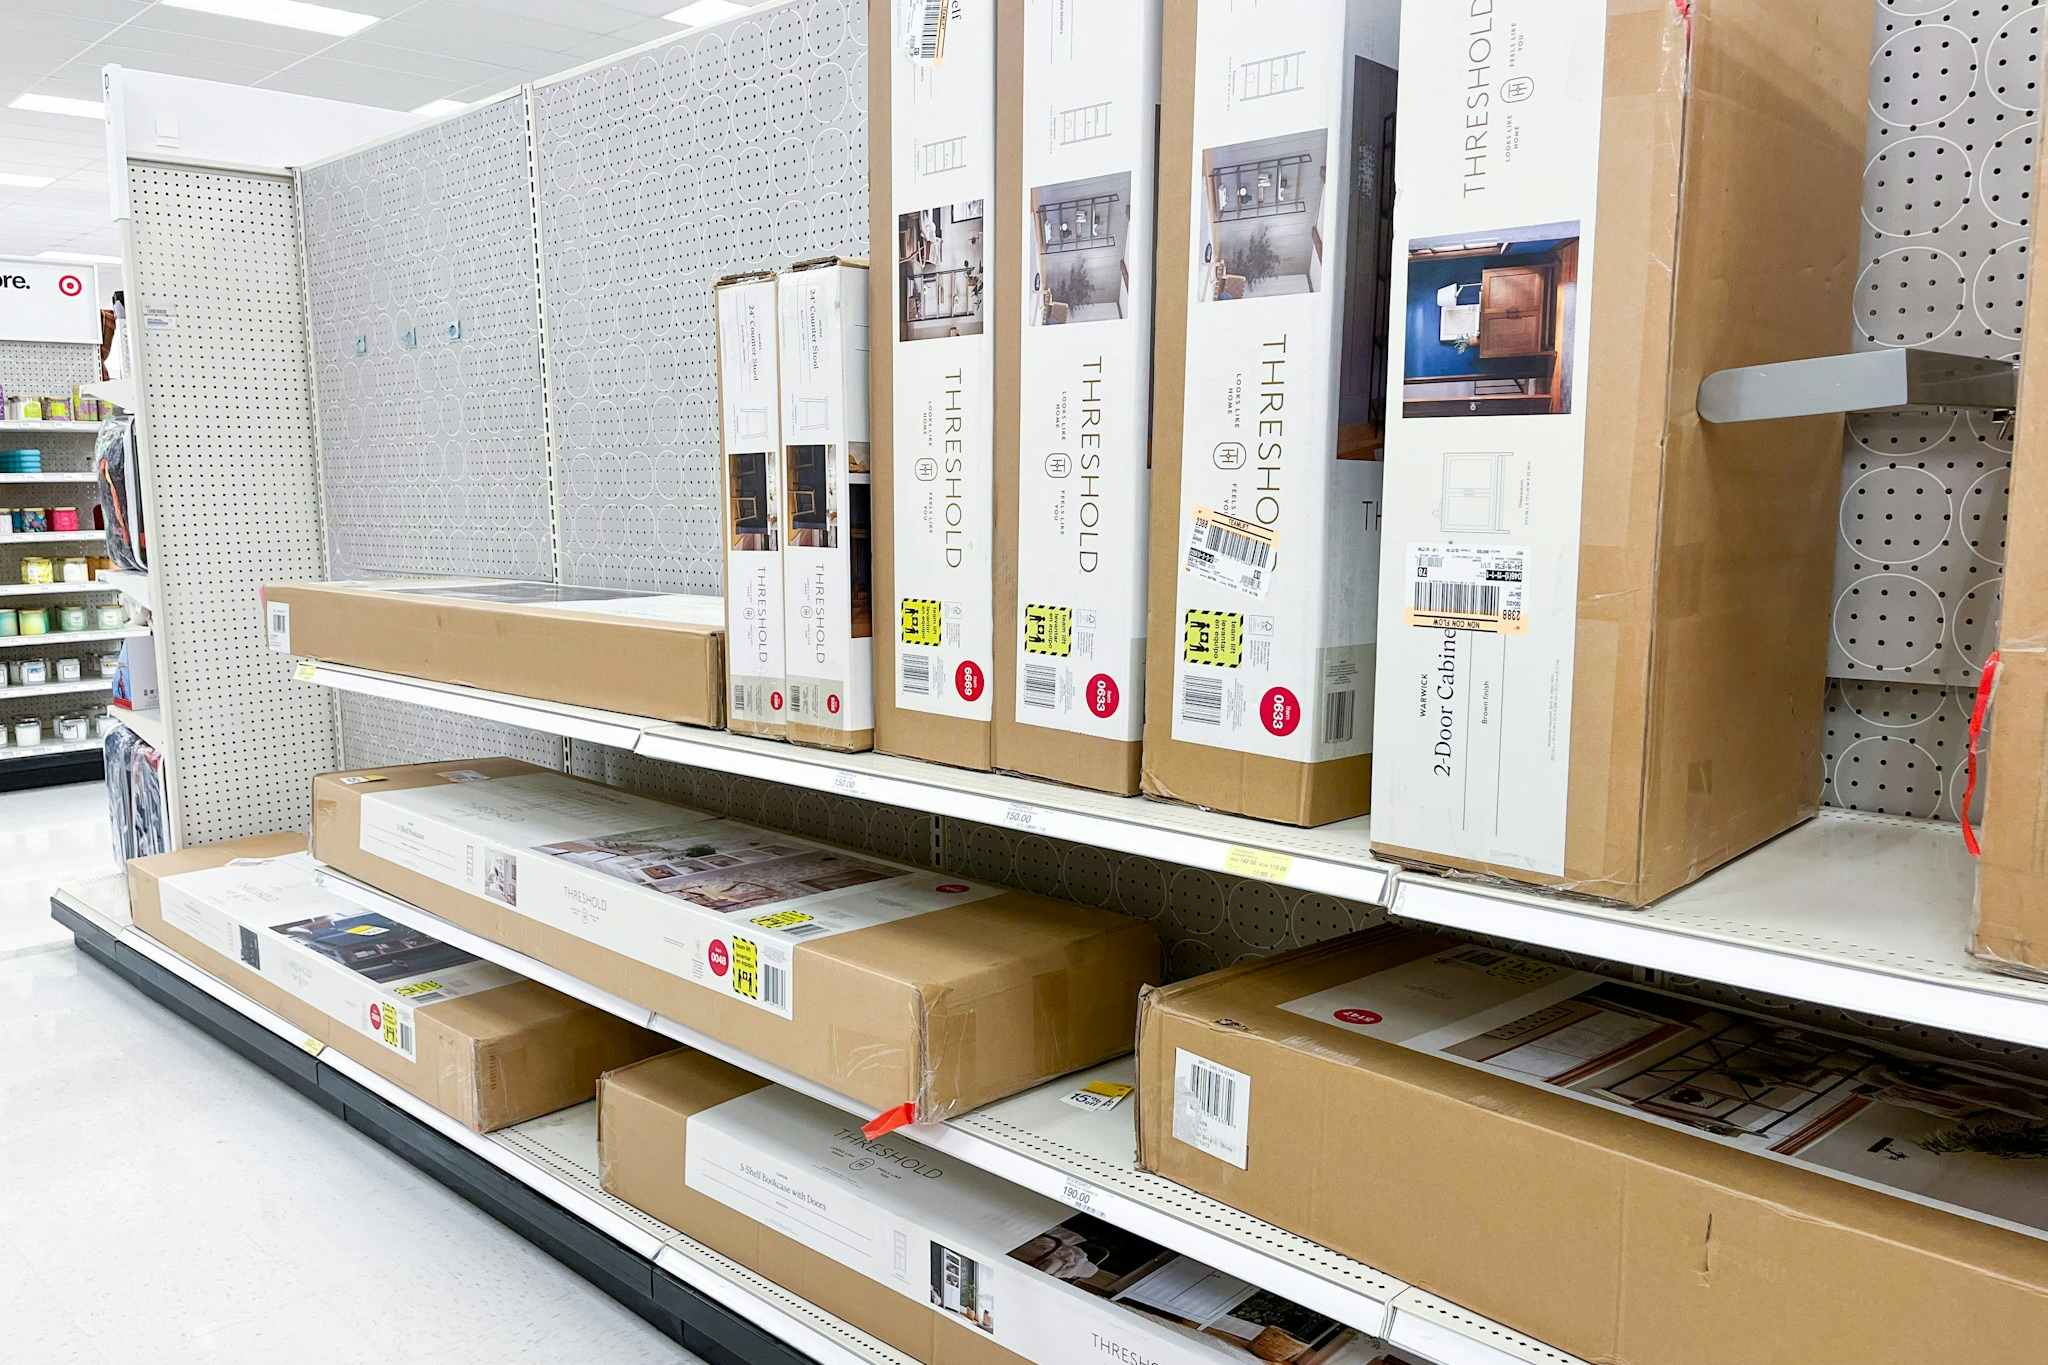 Studio McGee and Threshold Furniture on Clearance, 50% Off at Target